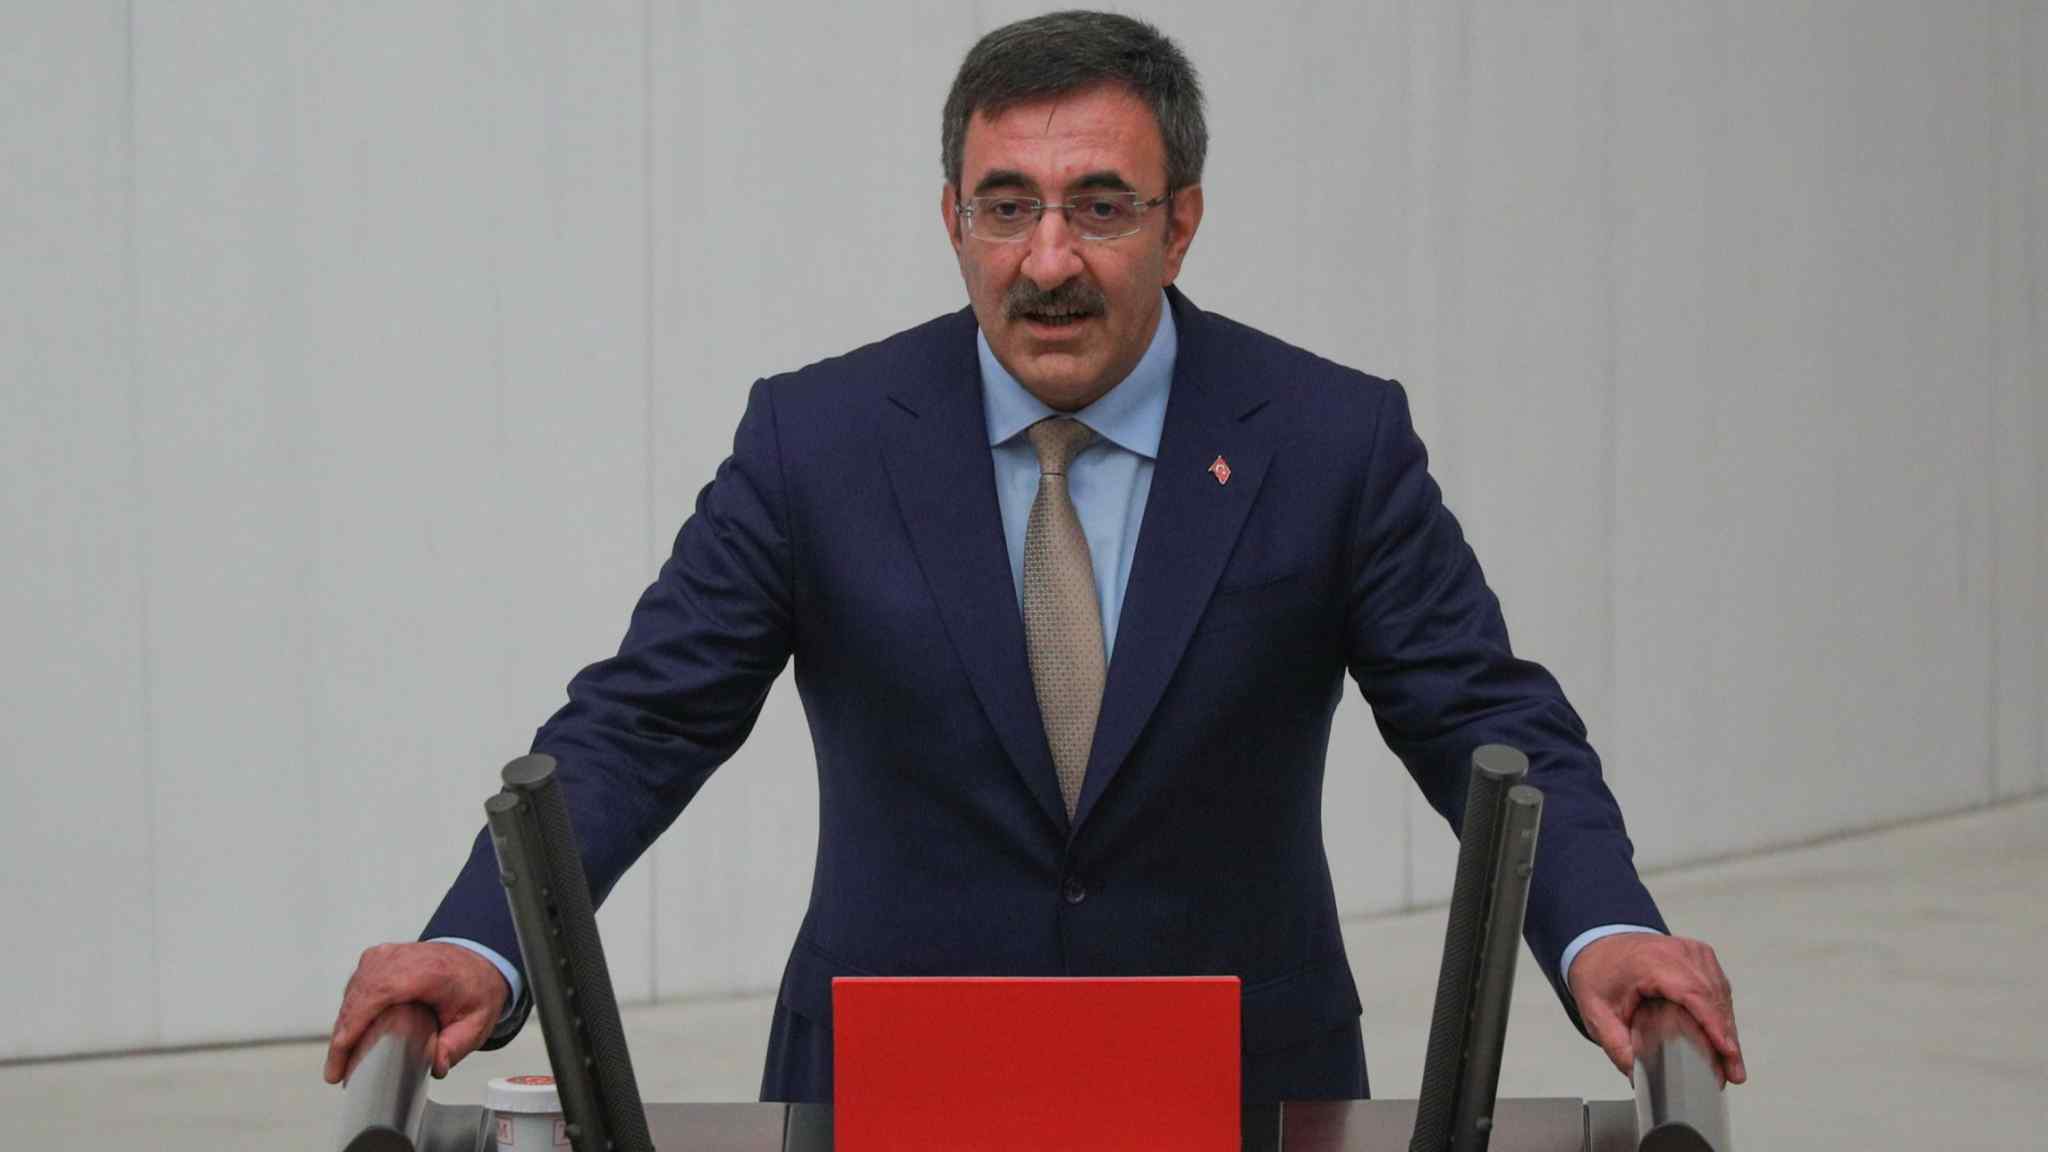 Turkey calls on Sweden to take more ‘concrete measures’ before joining Nato